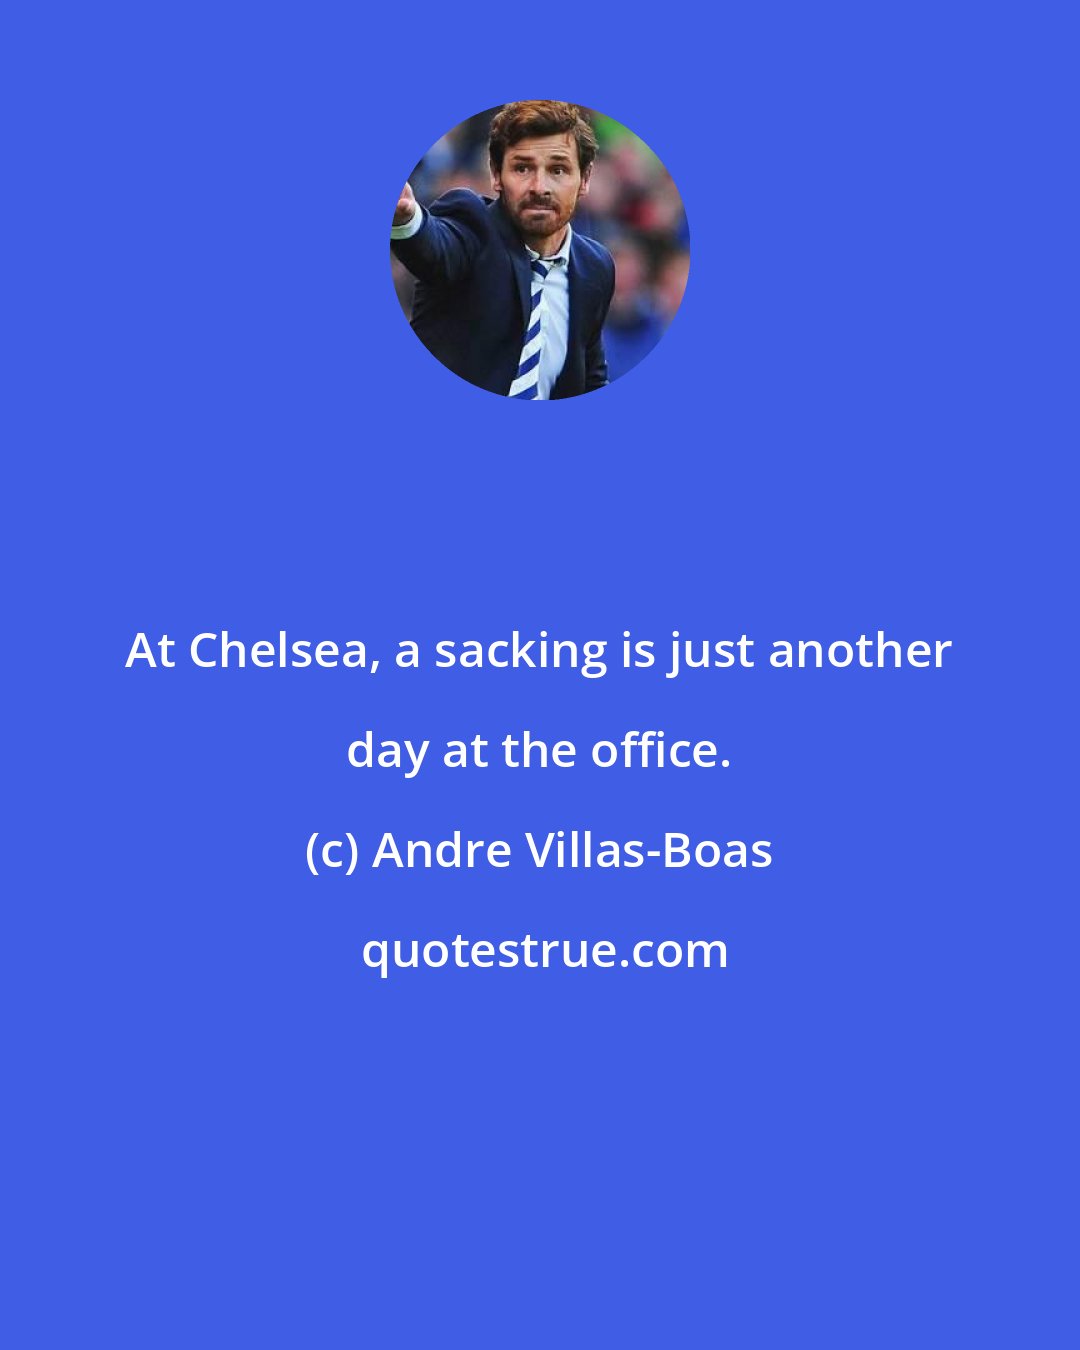 Andre Villas-Boas: At Chelsea, a sacking is just another day at the office.